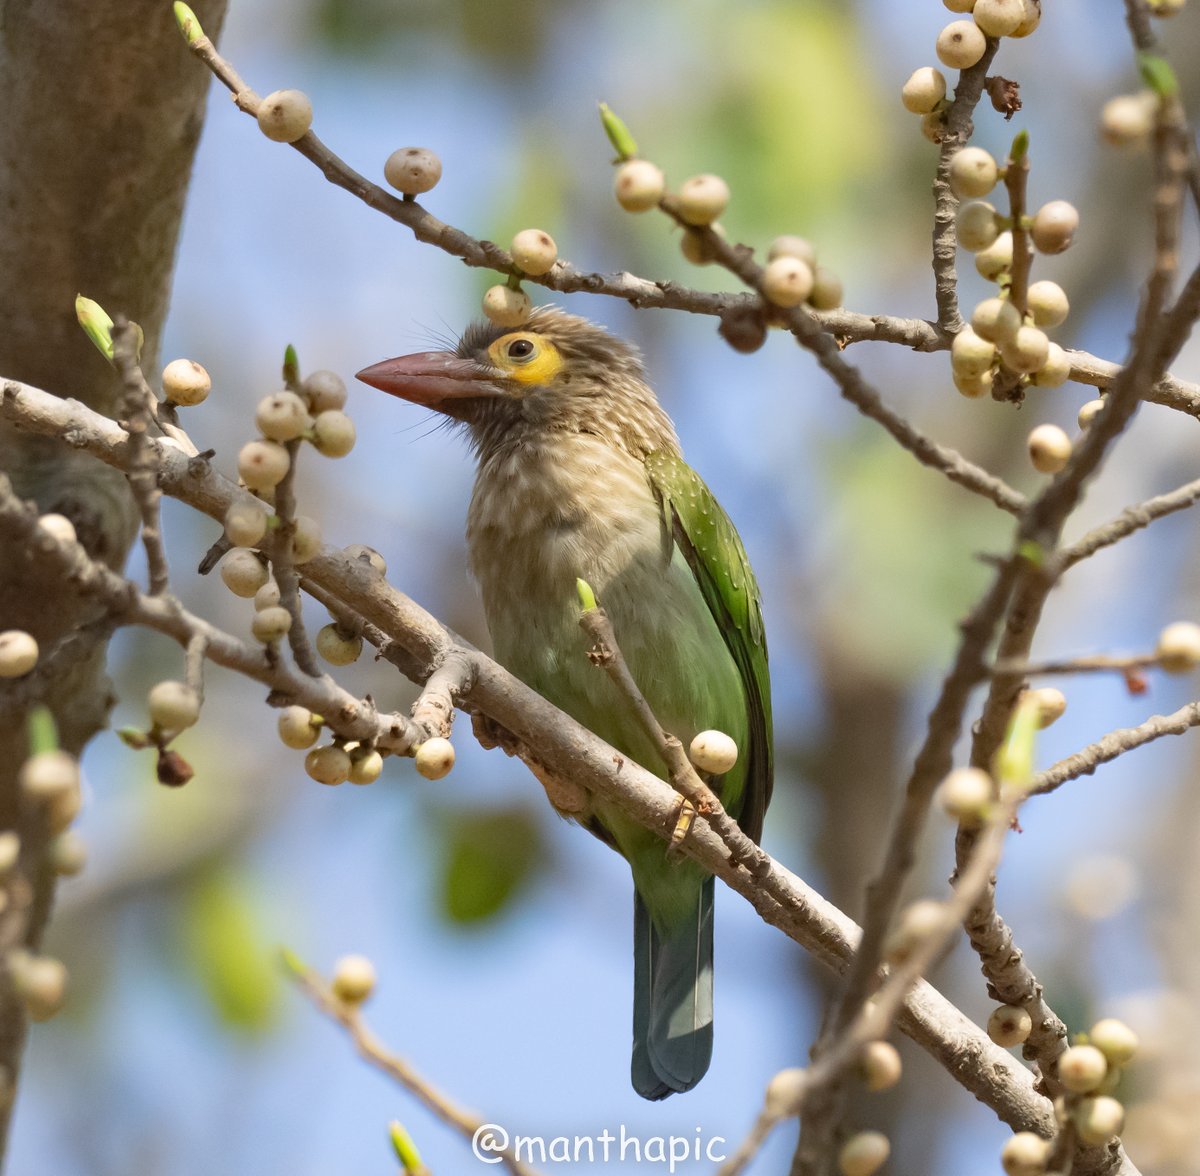 A Fruitful Day!!
Says a Brown headed Barbet
#indiaves #fruitsbasket #fruits #SpringVibes